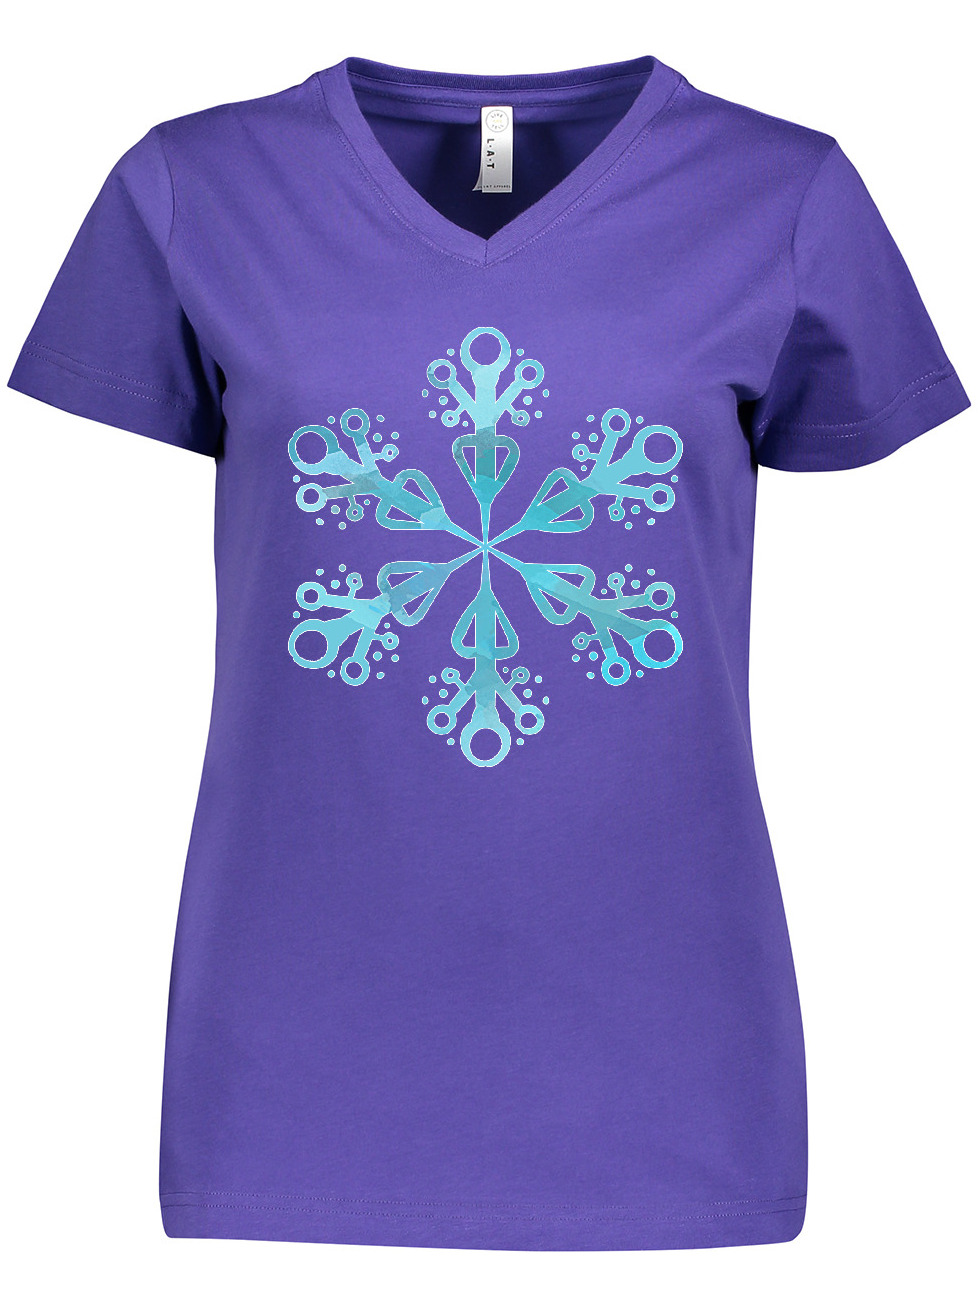 Inktastic Icy Blue Winter Snowflake Women's V-Neck T-Shirt - image 1 of 4